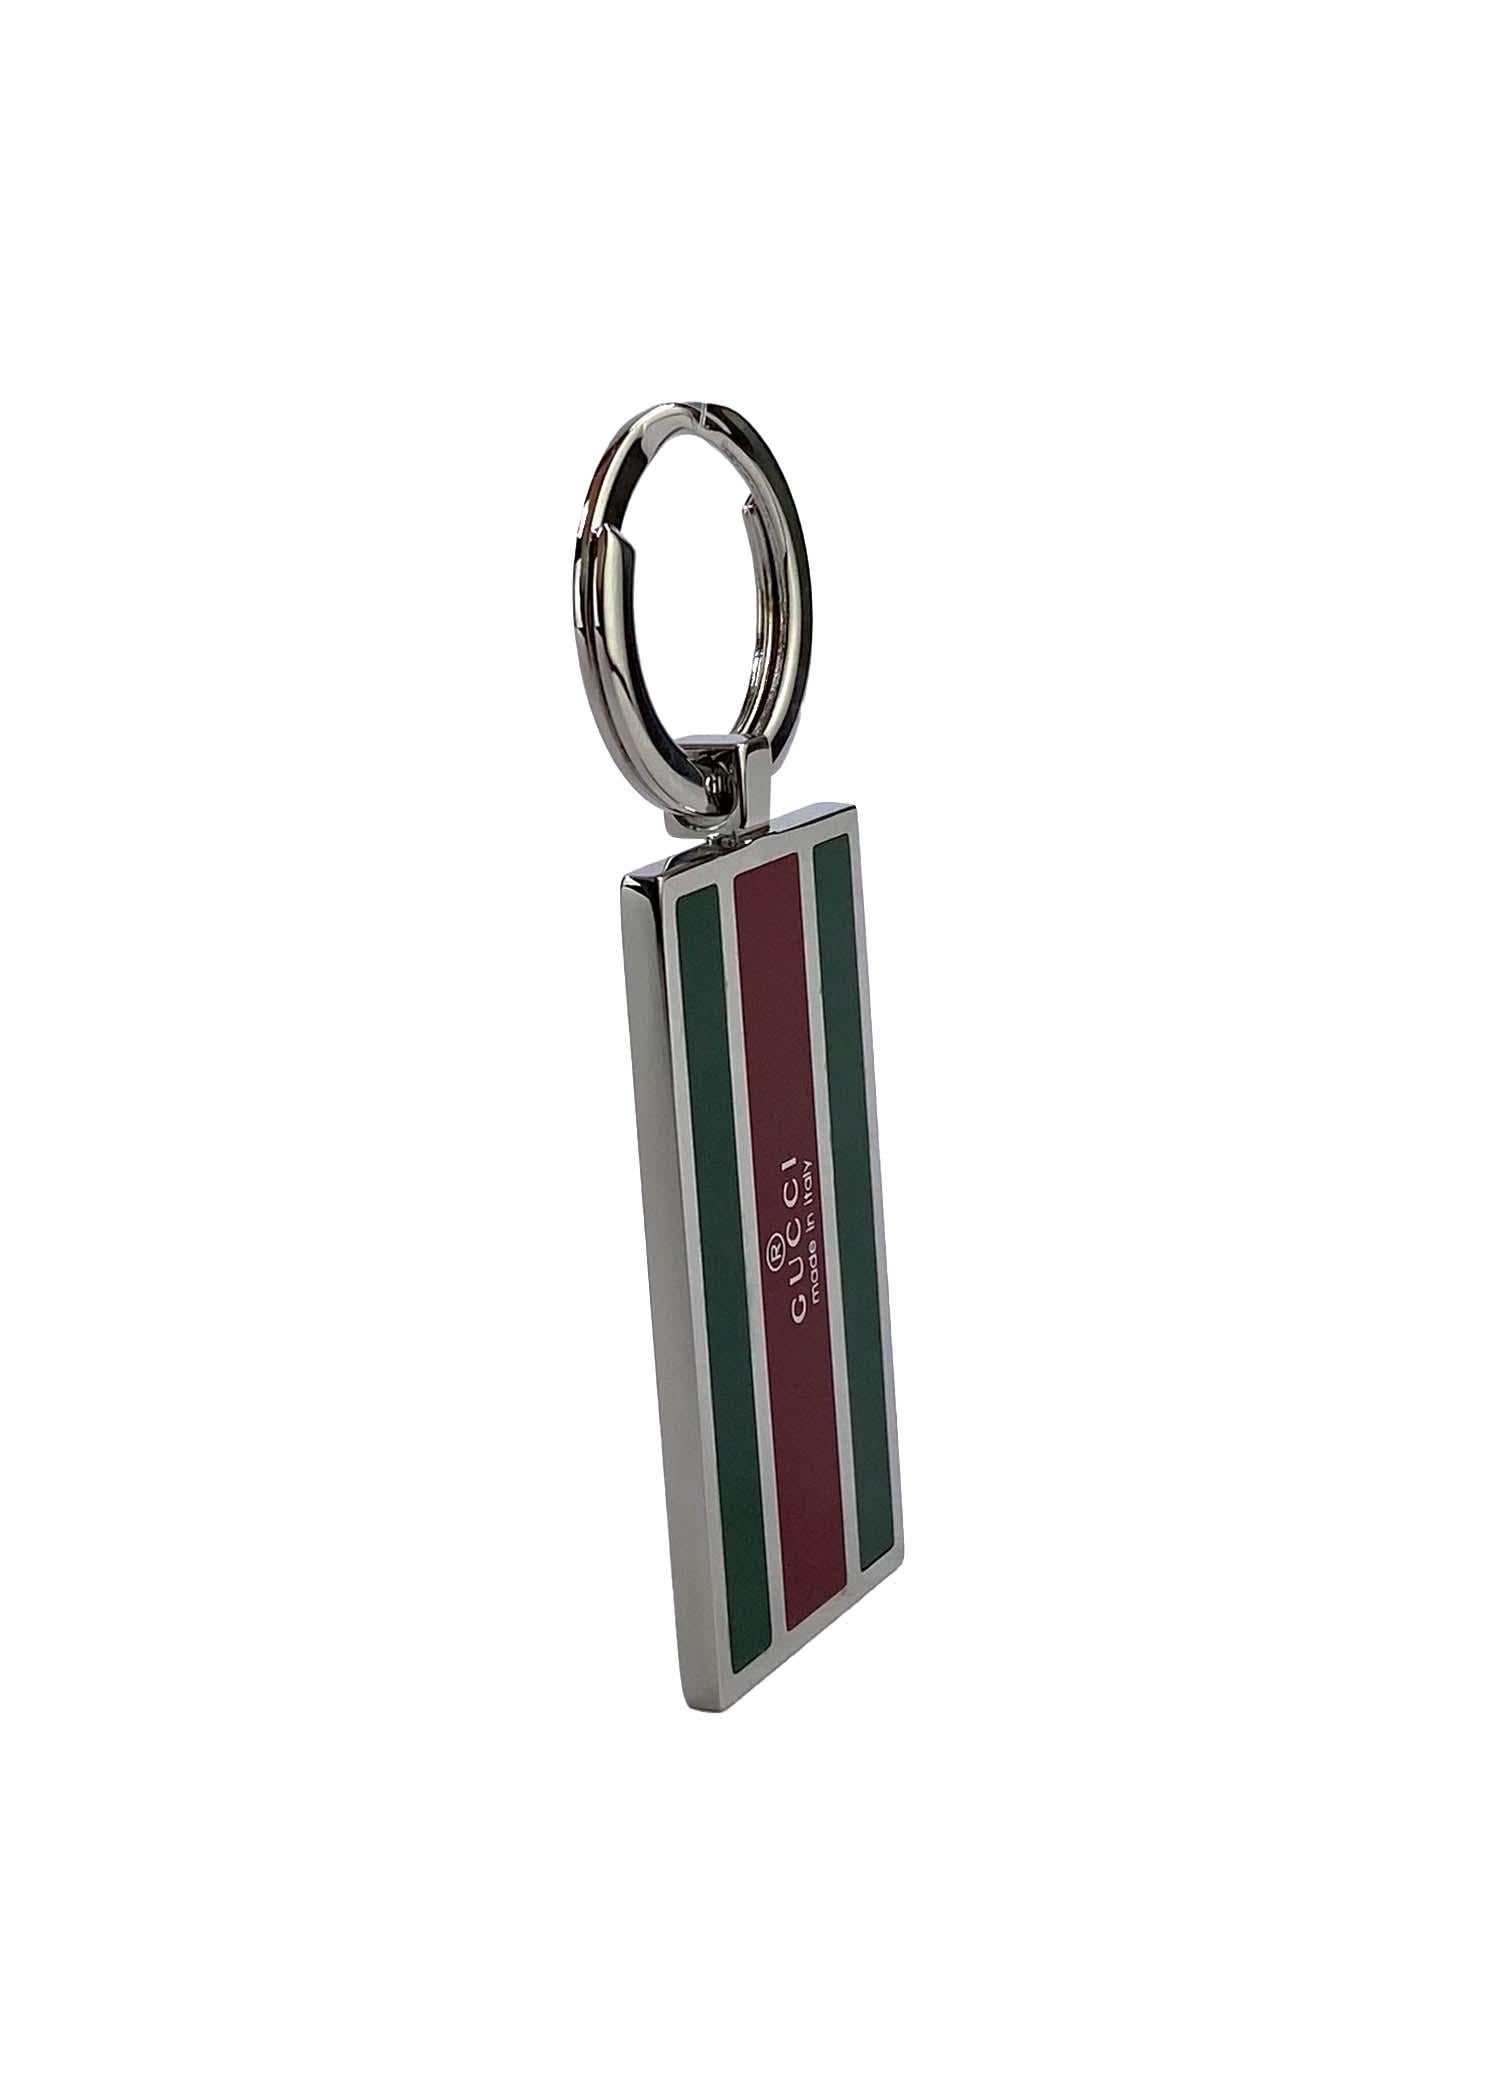 TheRealList presents: a Gucci silverplate green and red enamel Gucci keyring with its original box. The enamel detailing creates the house of Gucci's signature web stripe pattern. 

Follow us on Instagram! @_the_reallist_